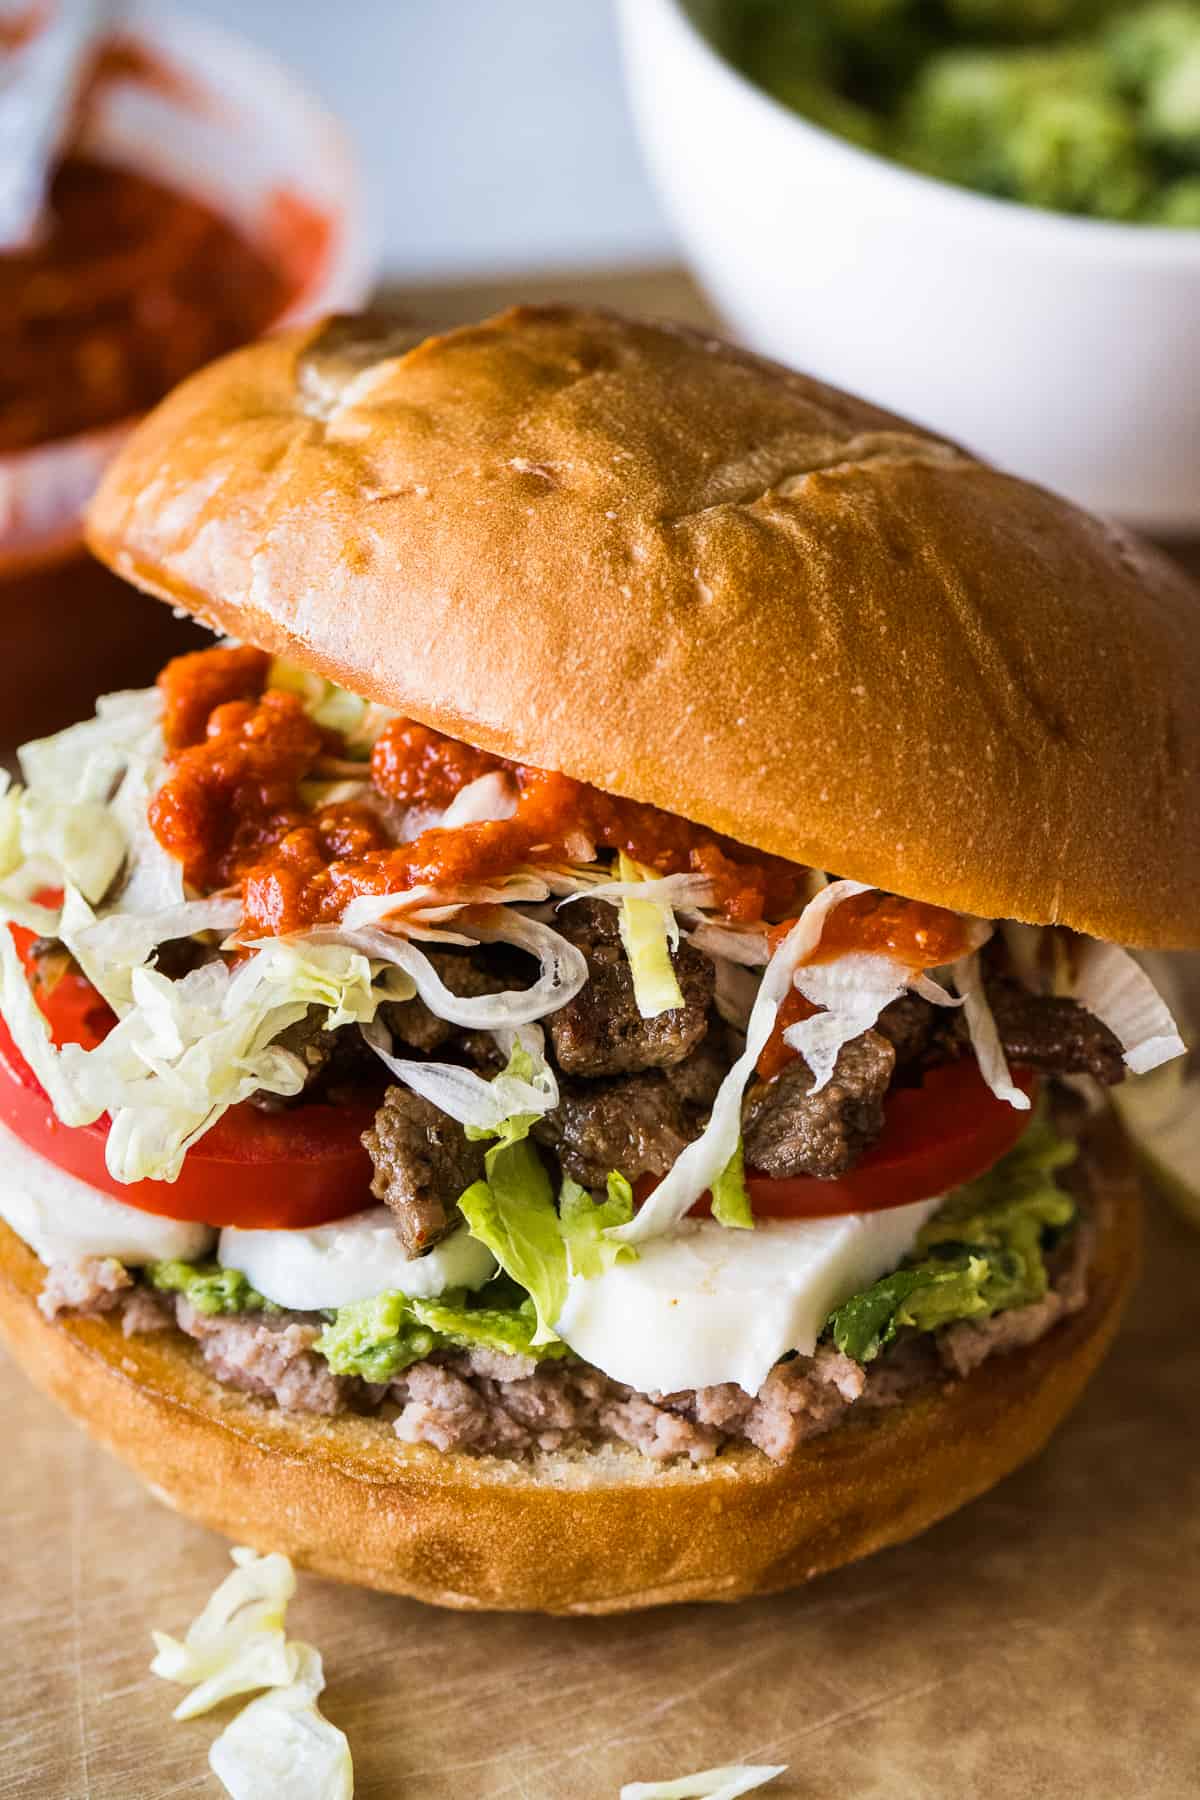 A torta Mexican sandwich filled with refried beans, guacamole, queso fresco, tomato, steak, lettuce, and salsa.